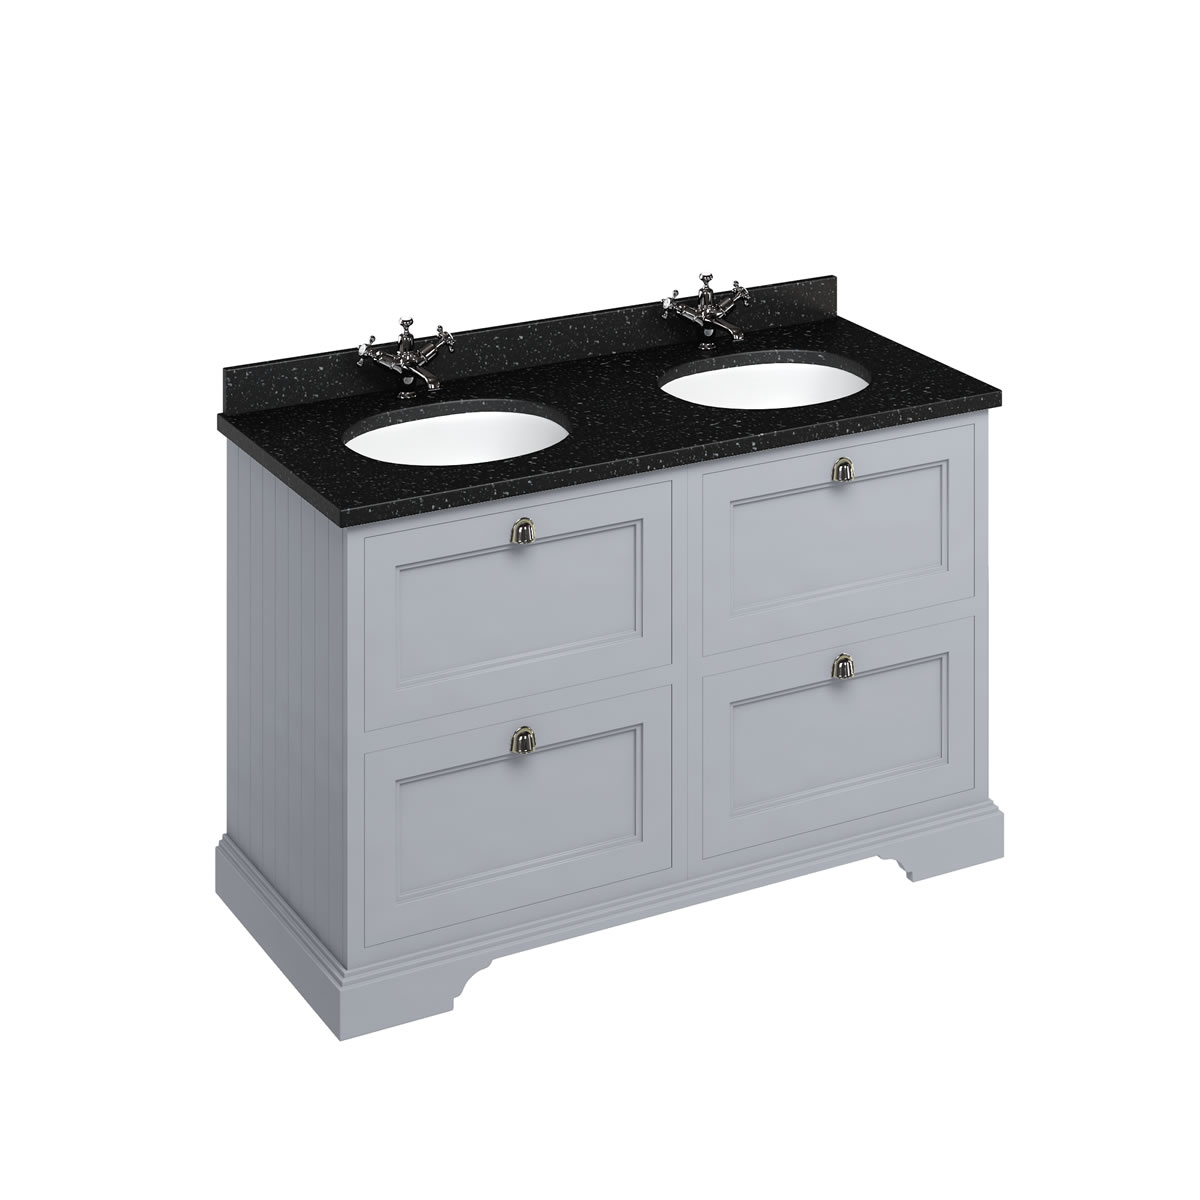 Freestanding 130 Vanity Unit with drawers - Classic Grey and Minerva black granite worktop with two integrated white basins 